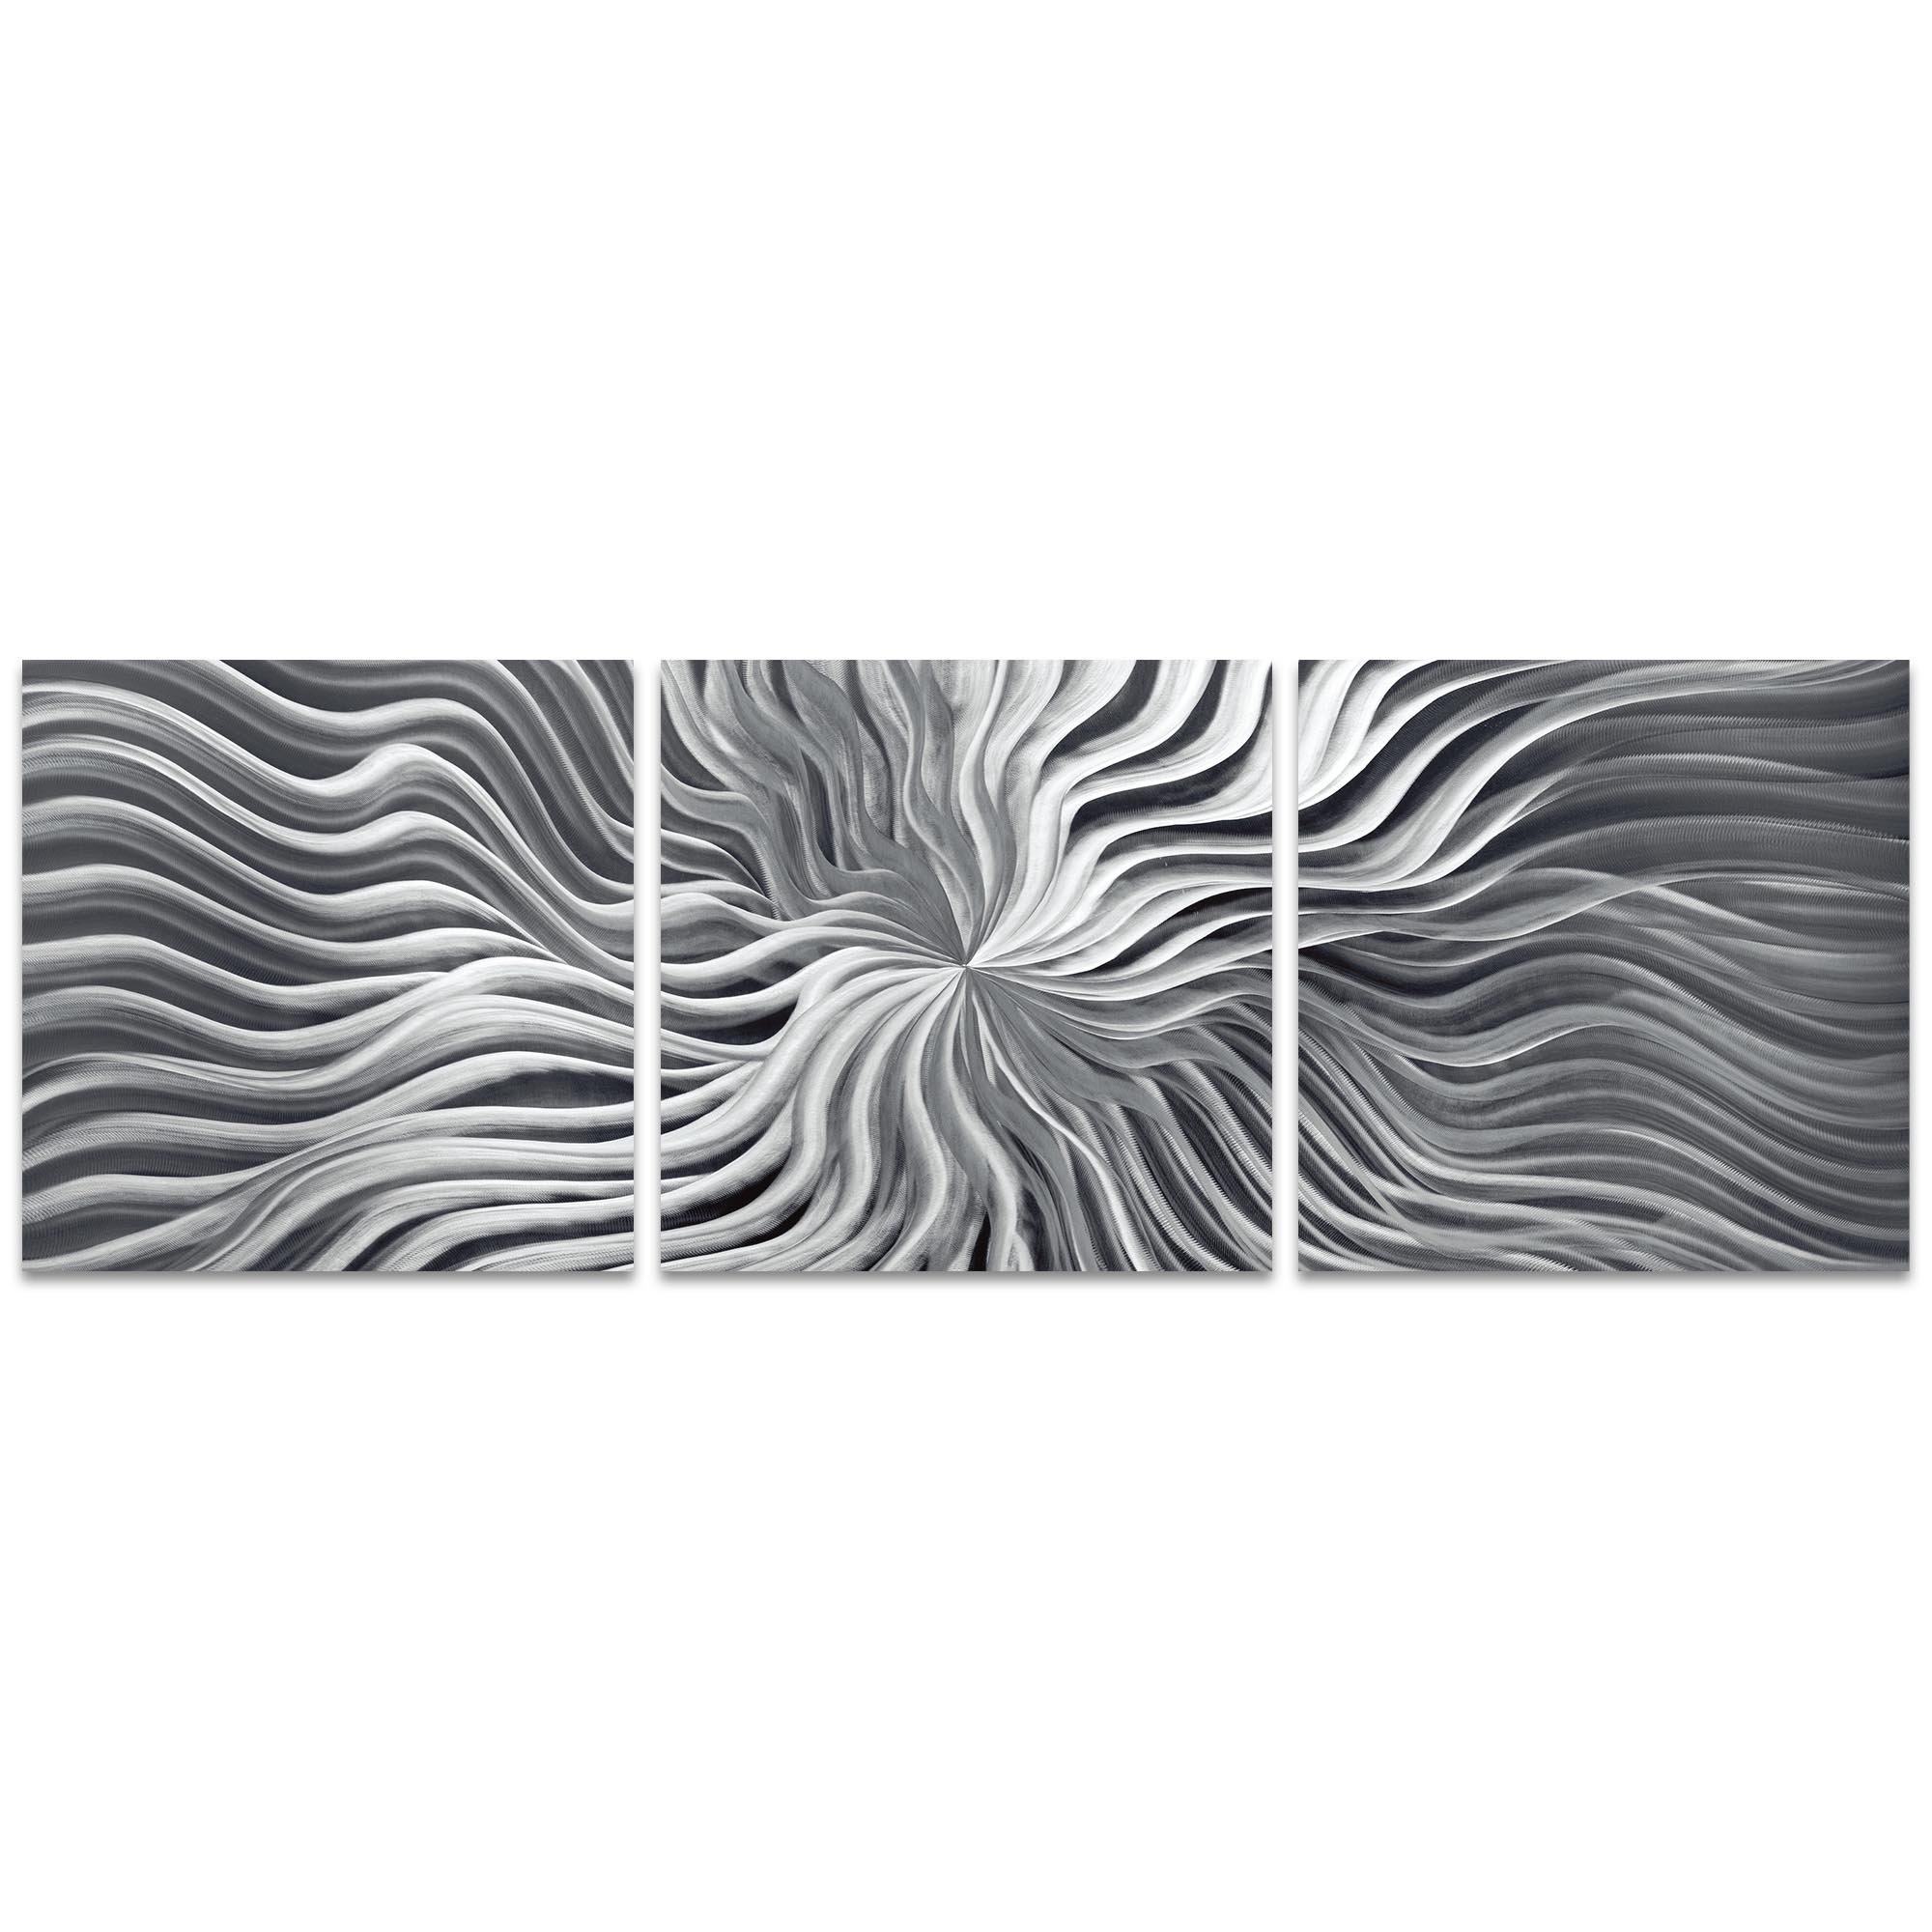 Flexure Triptych 38x12in. Metal or Acrylic Contemporary Decor